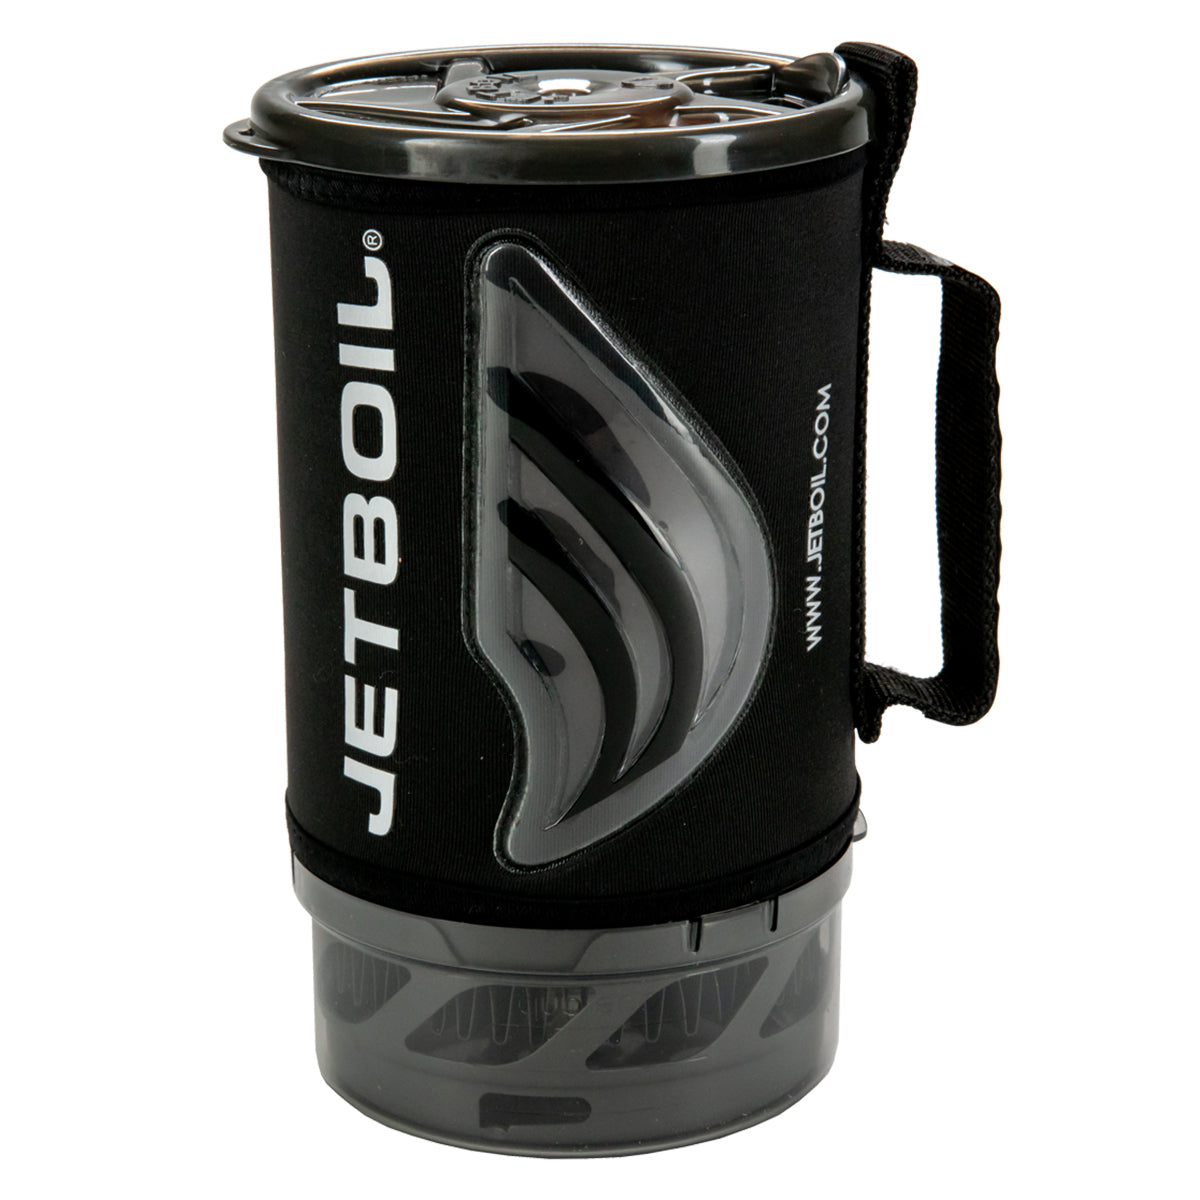 Jetboil Flash Stove System by Jetboil | Camping - goHUNT Shop